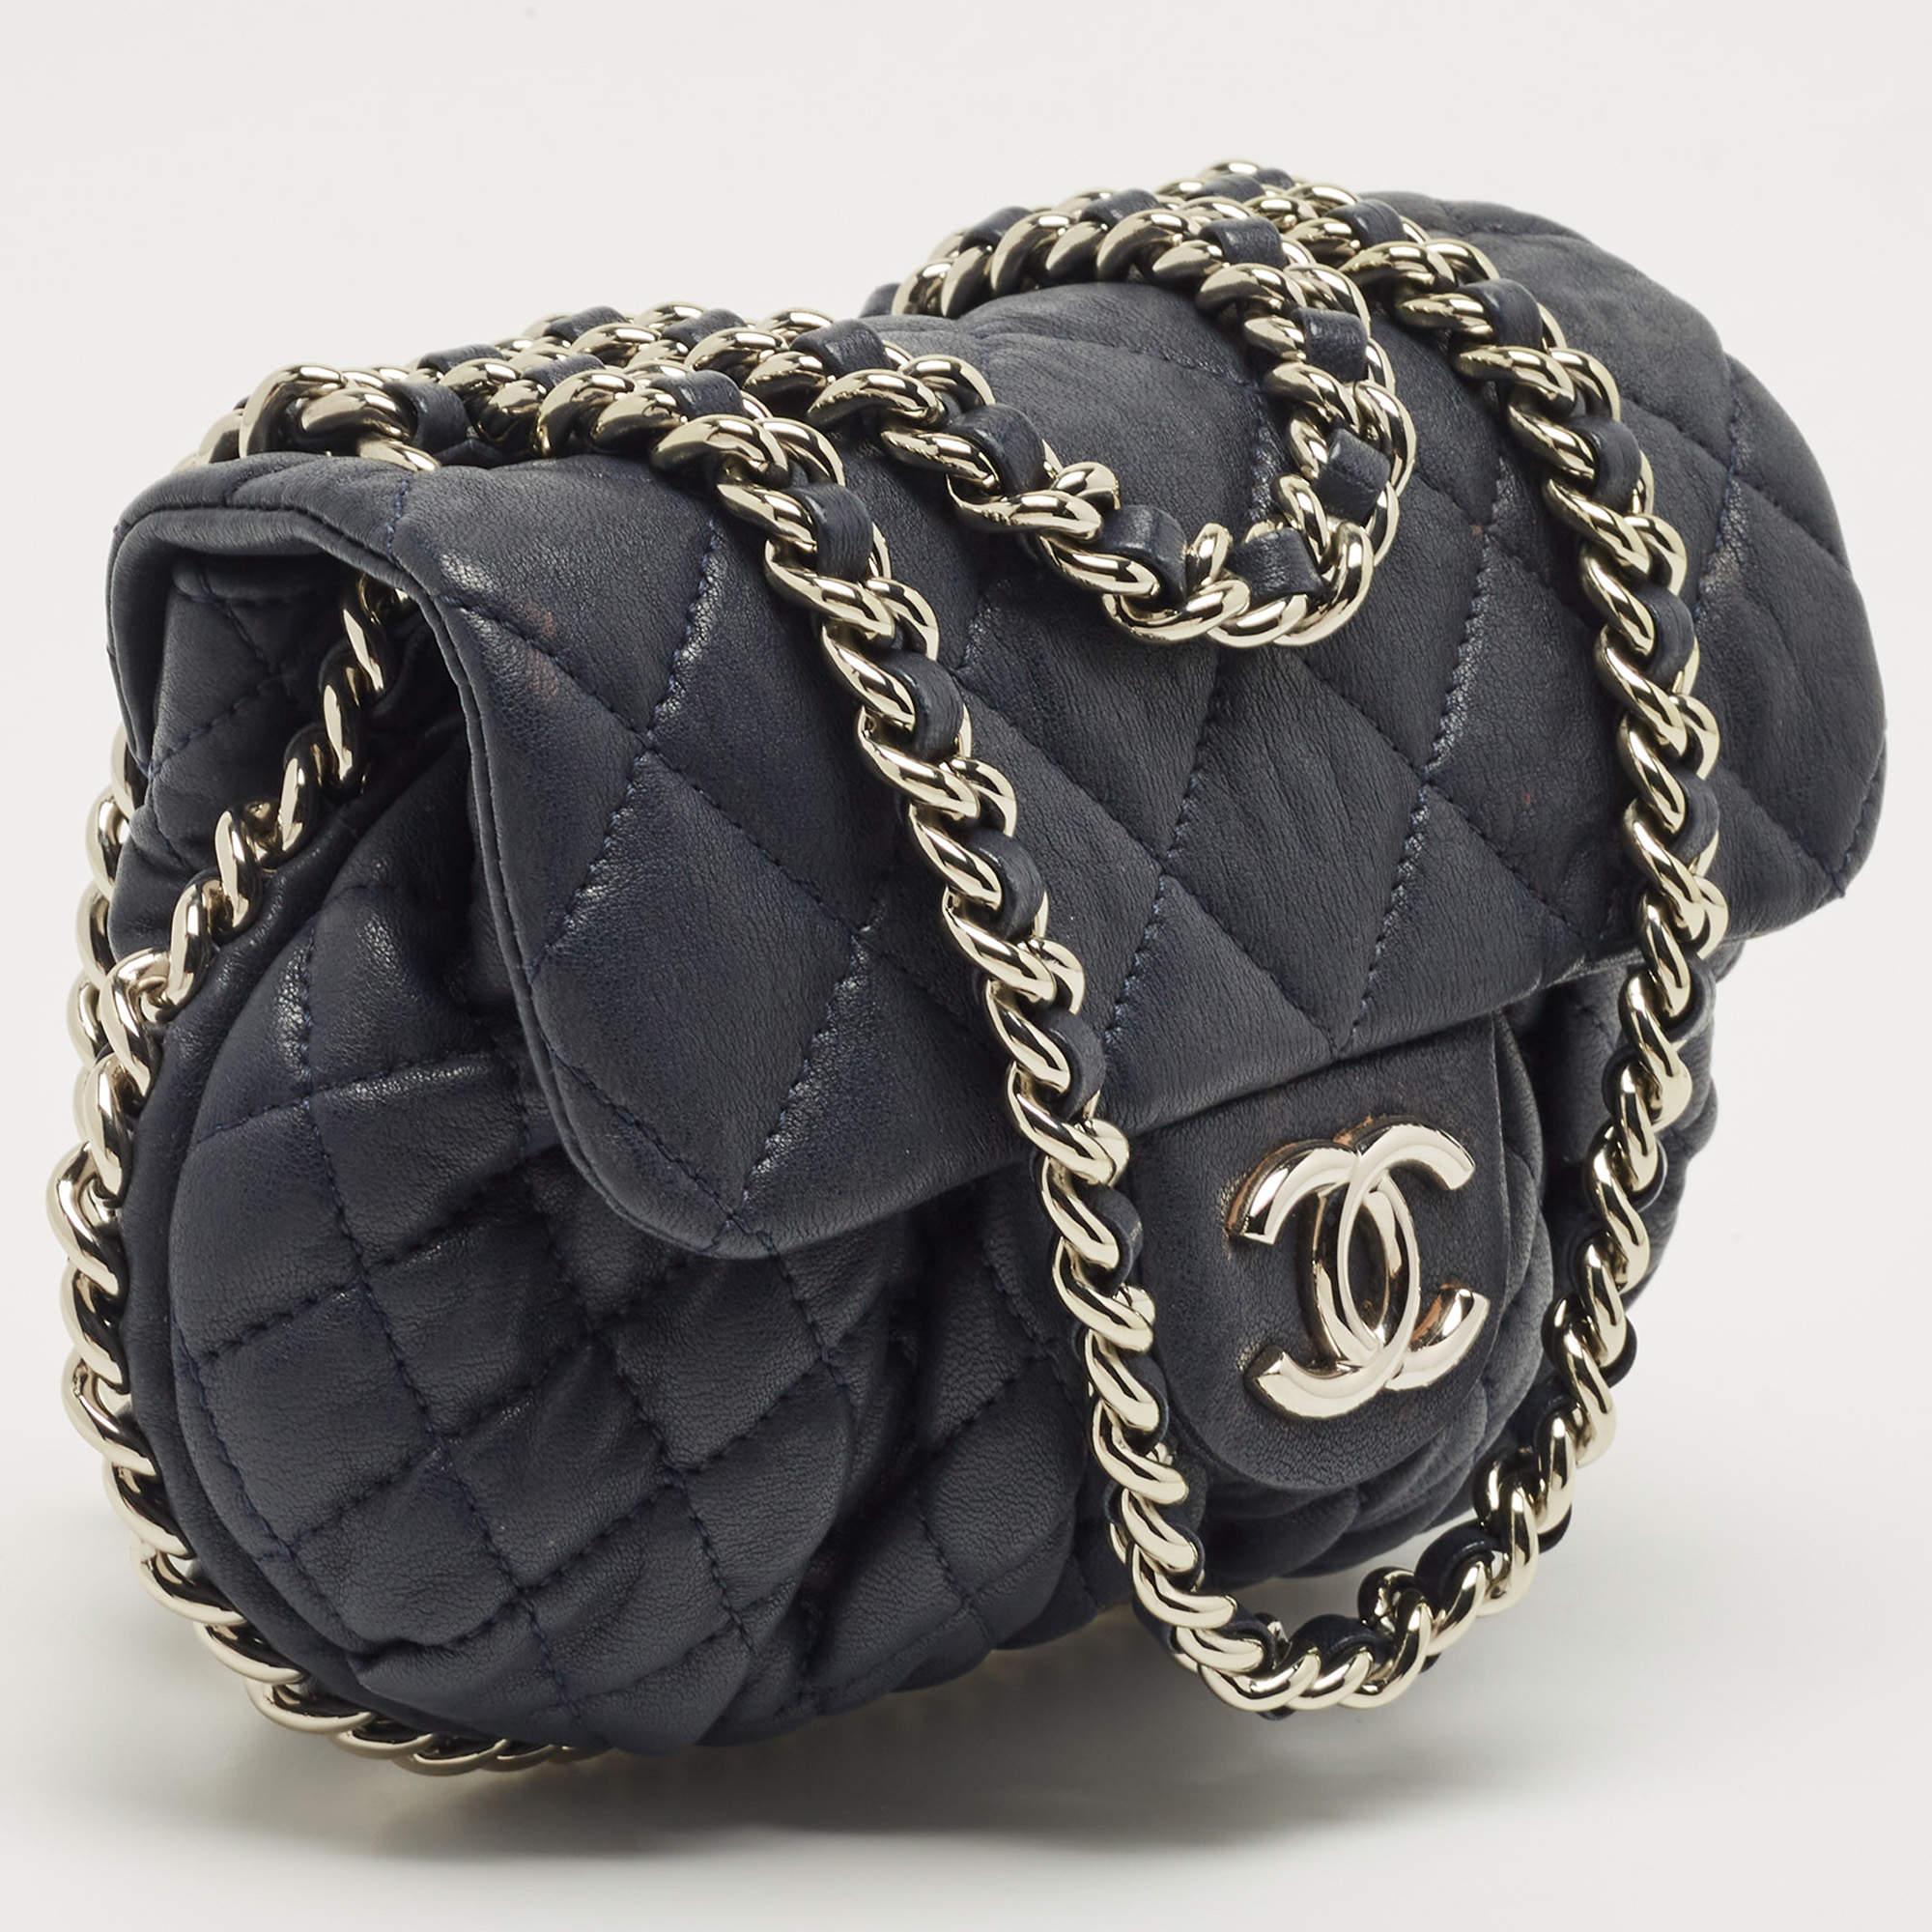 Indulge in luxury with this Chanel Chain Around bag. Meticulously crafted from premium materials, it combines exquisite design, impeccable craftsmanship, and timeless elegance. Elevate your style with this fashion accessory.

